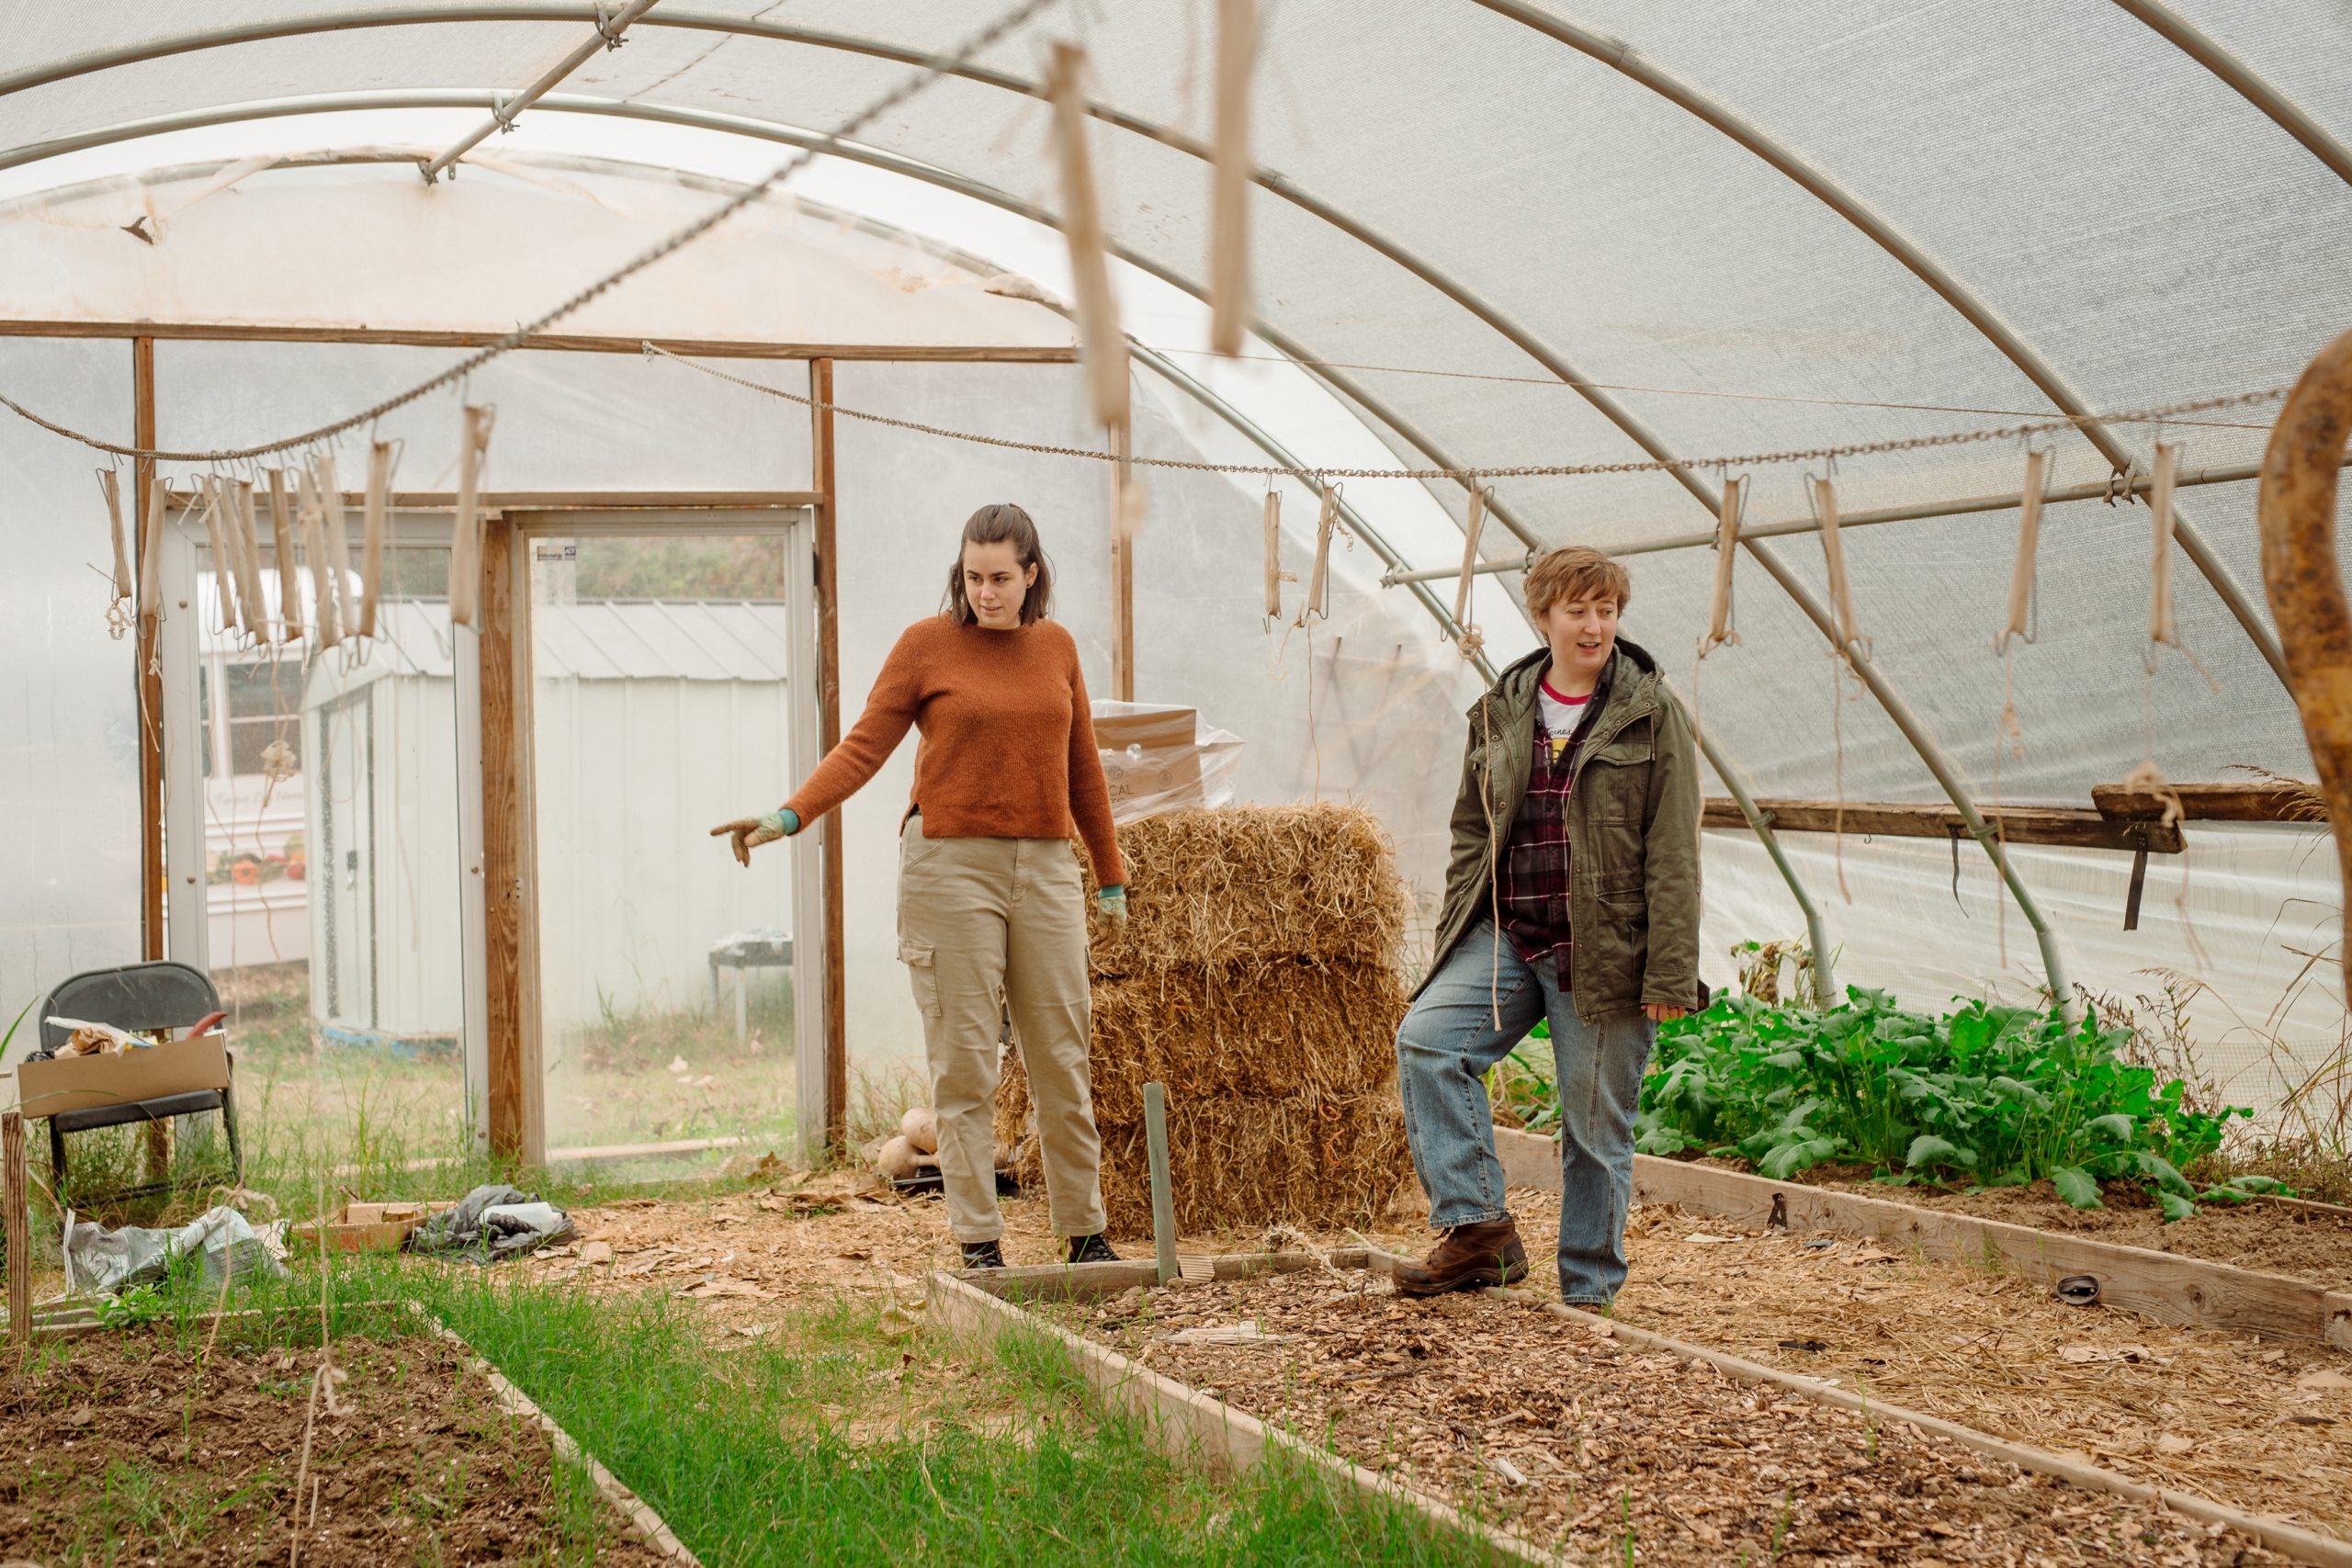 Two people stand in a greenhouse looking at raised plant beds.